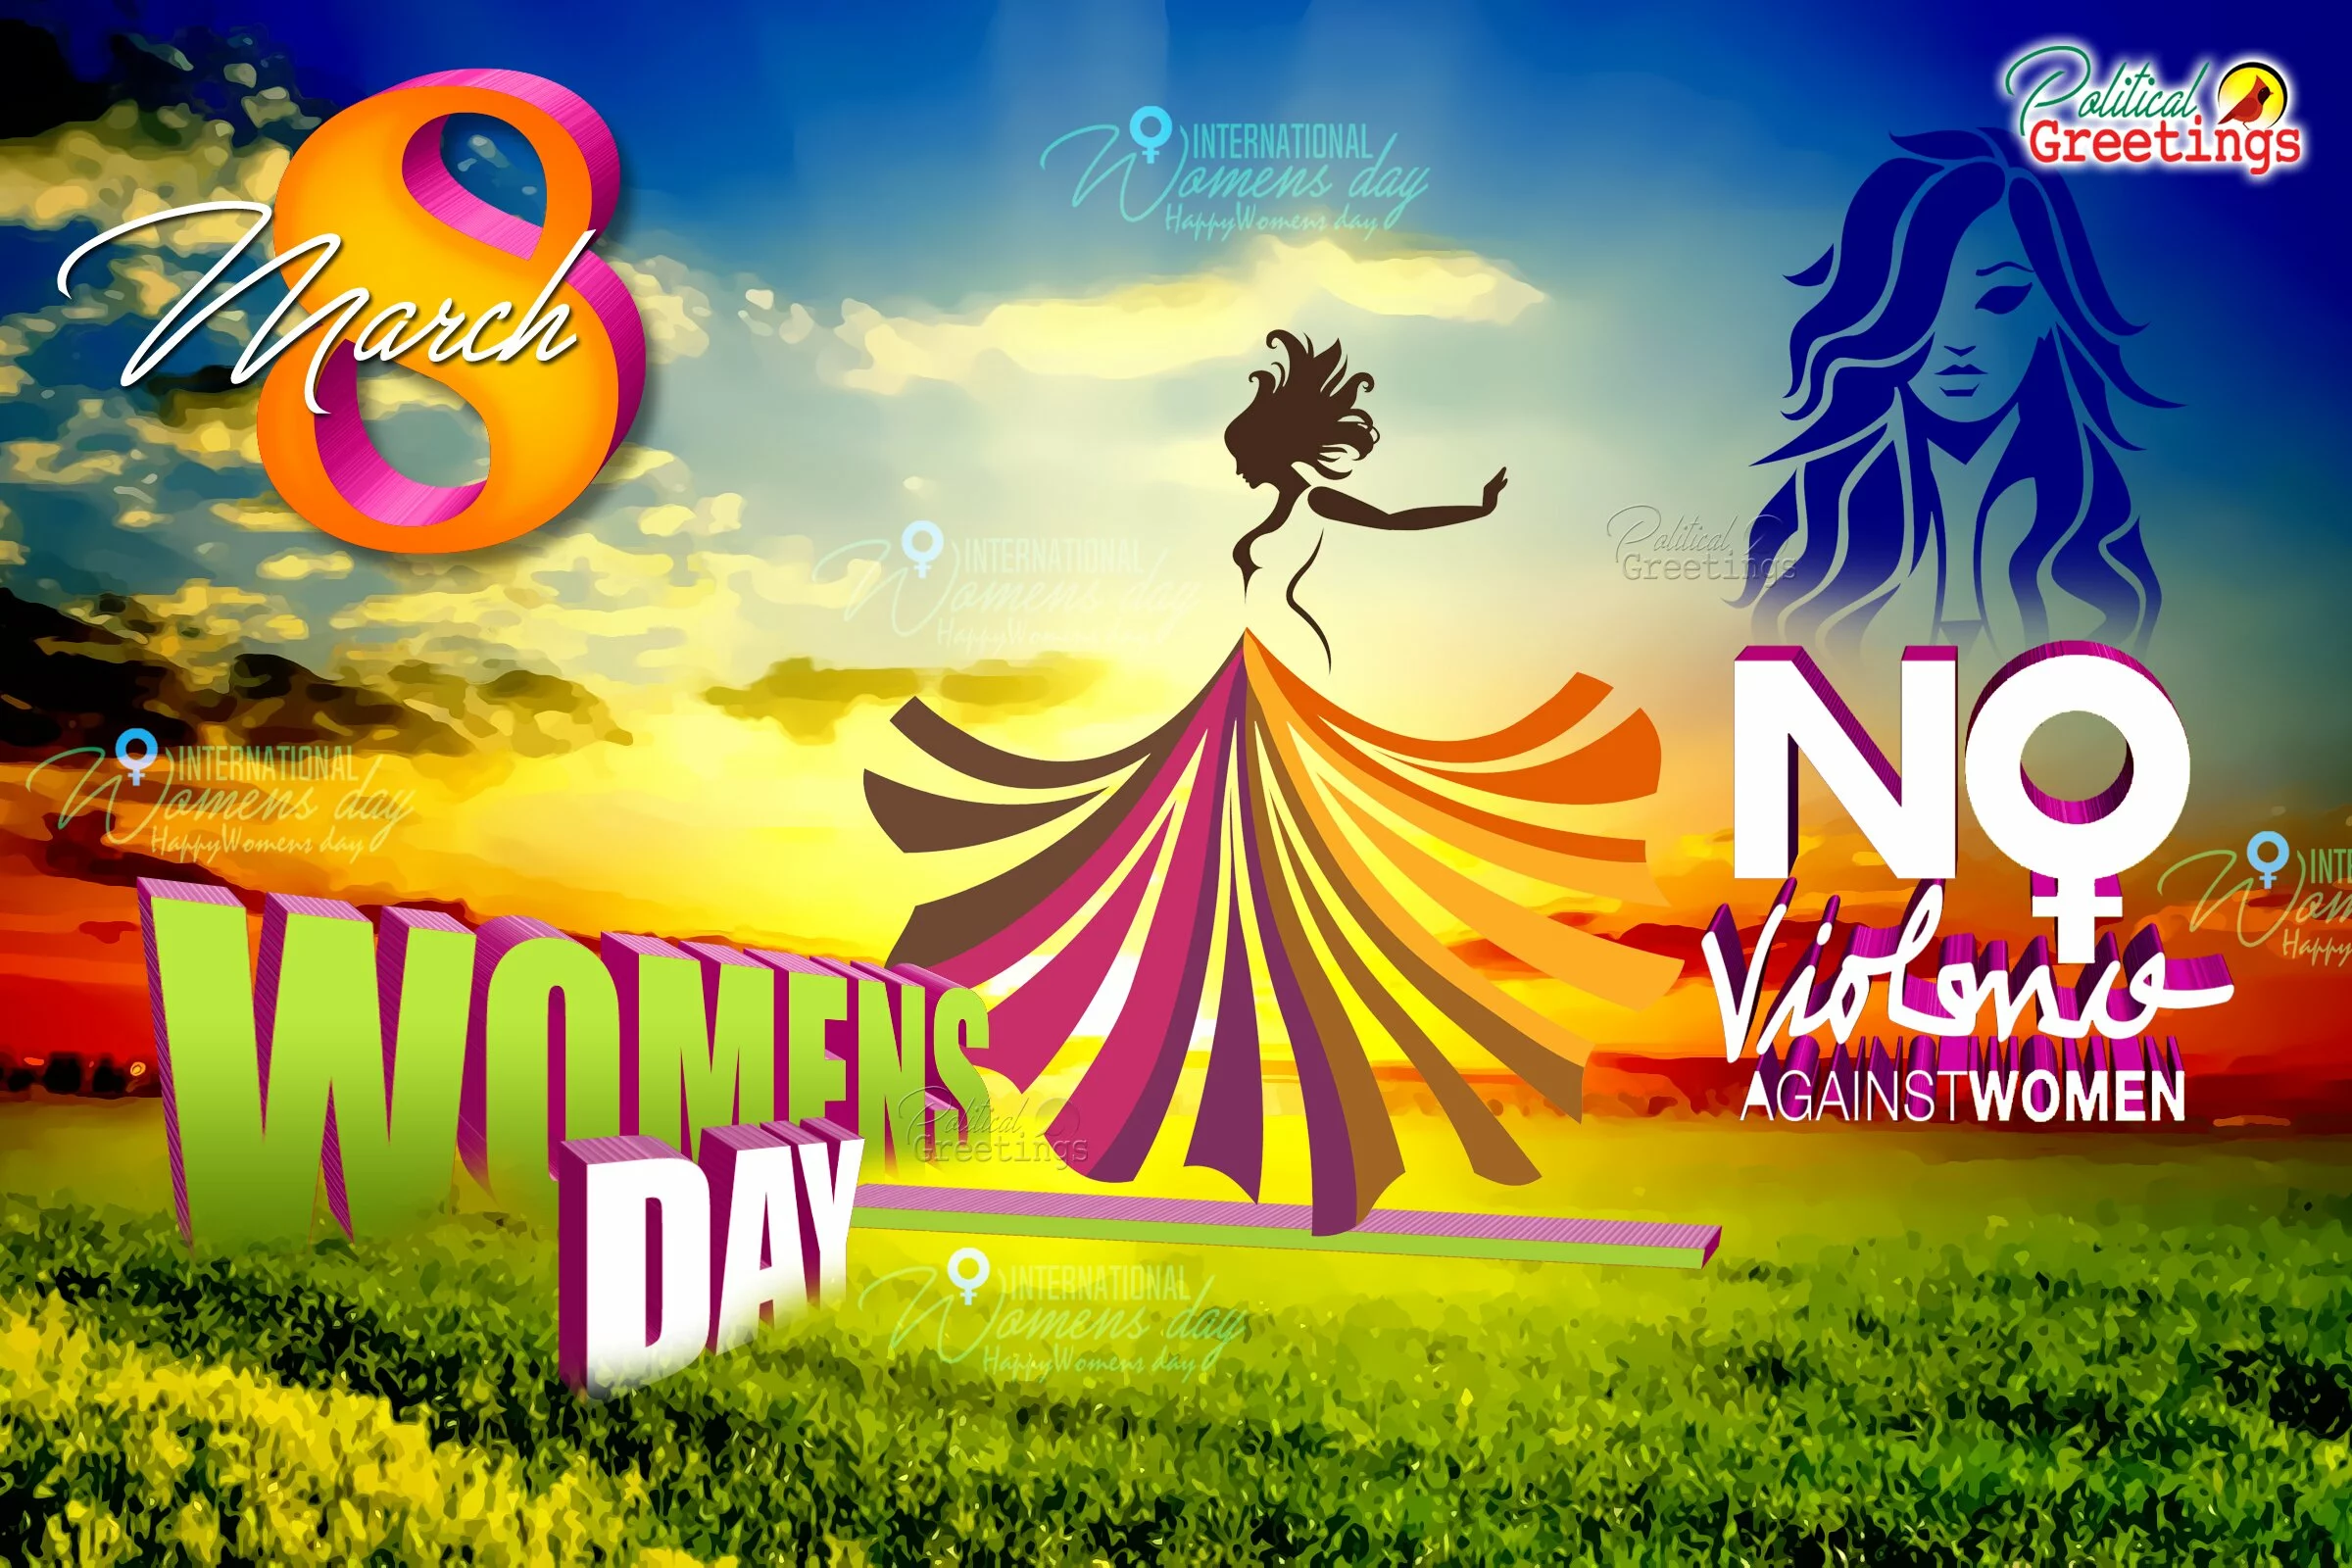 happyl-womens-day-wishes-quotes-hd-images-photos